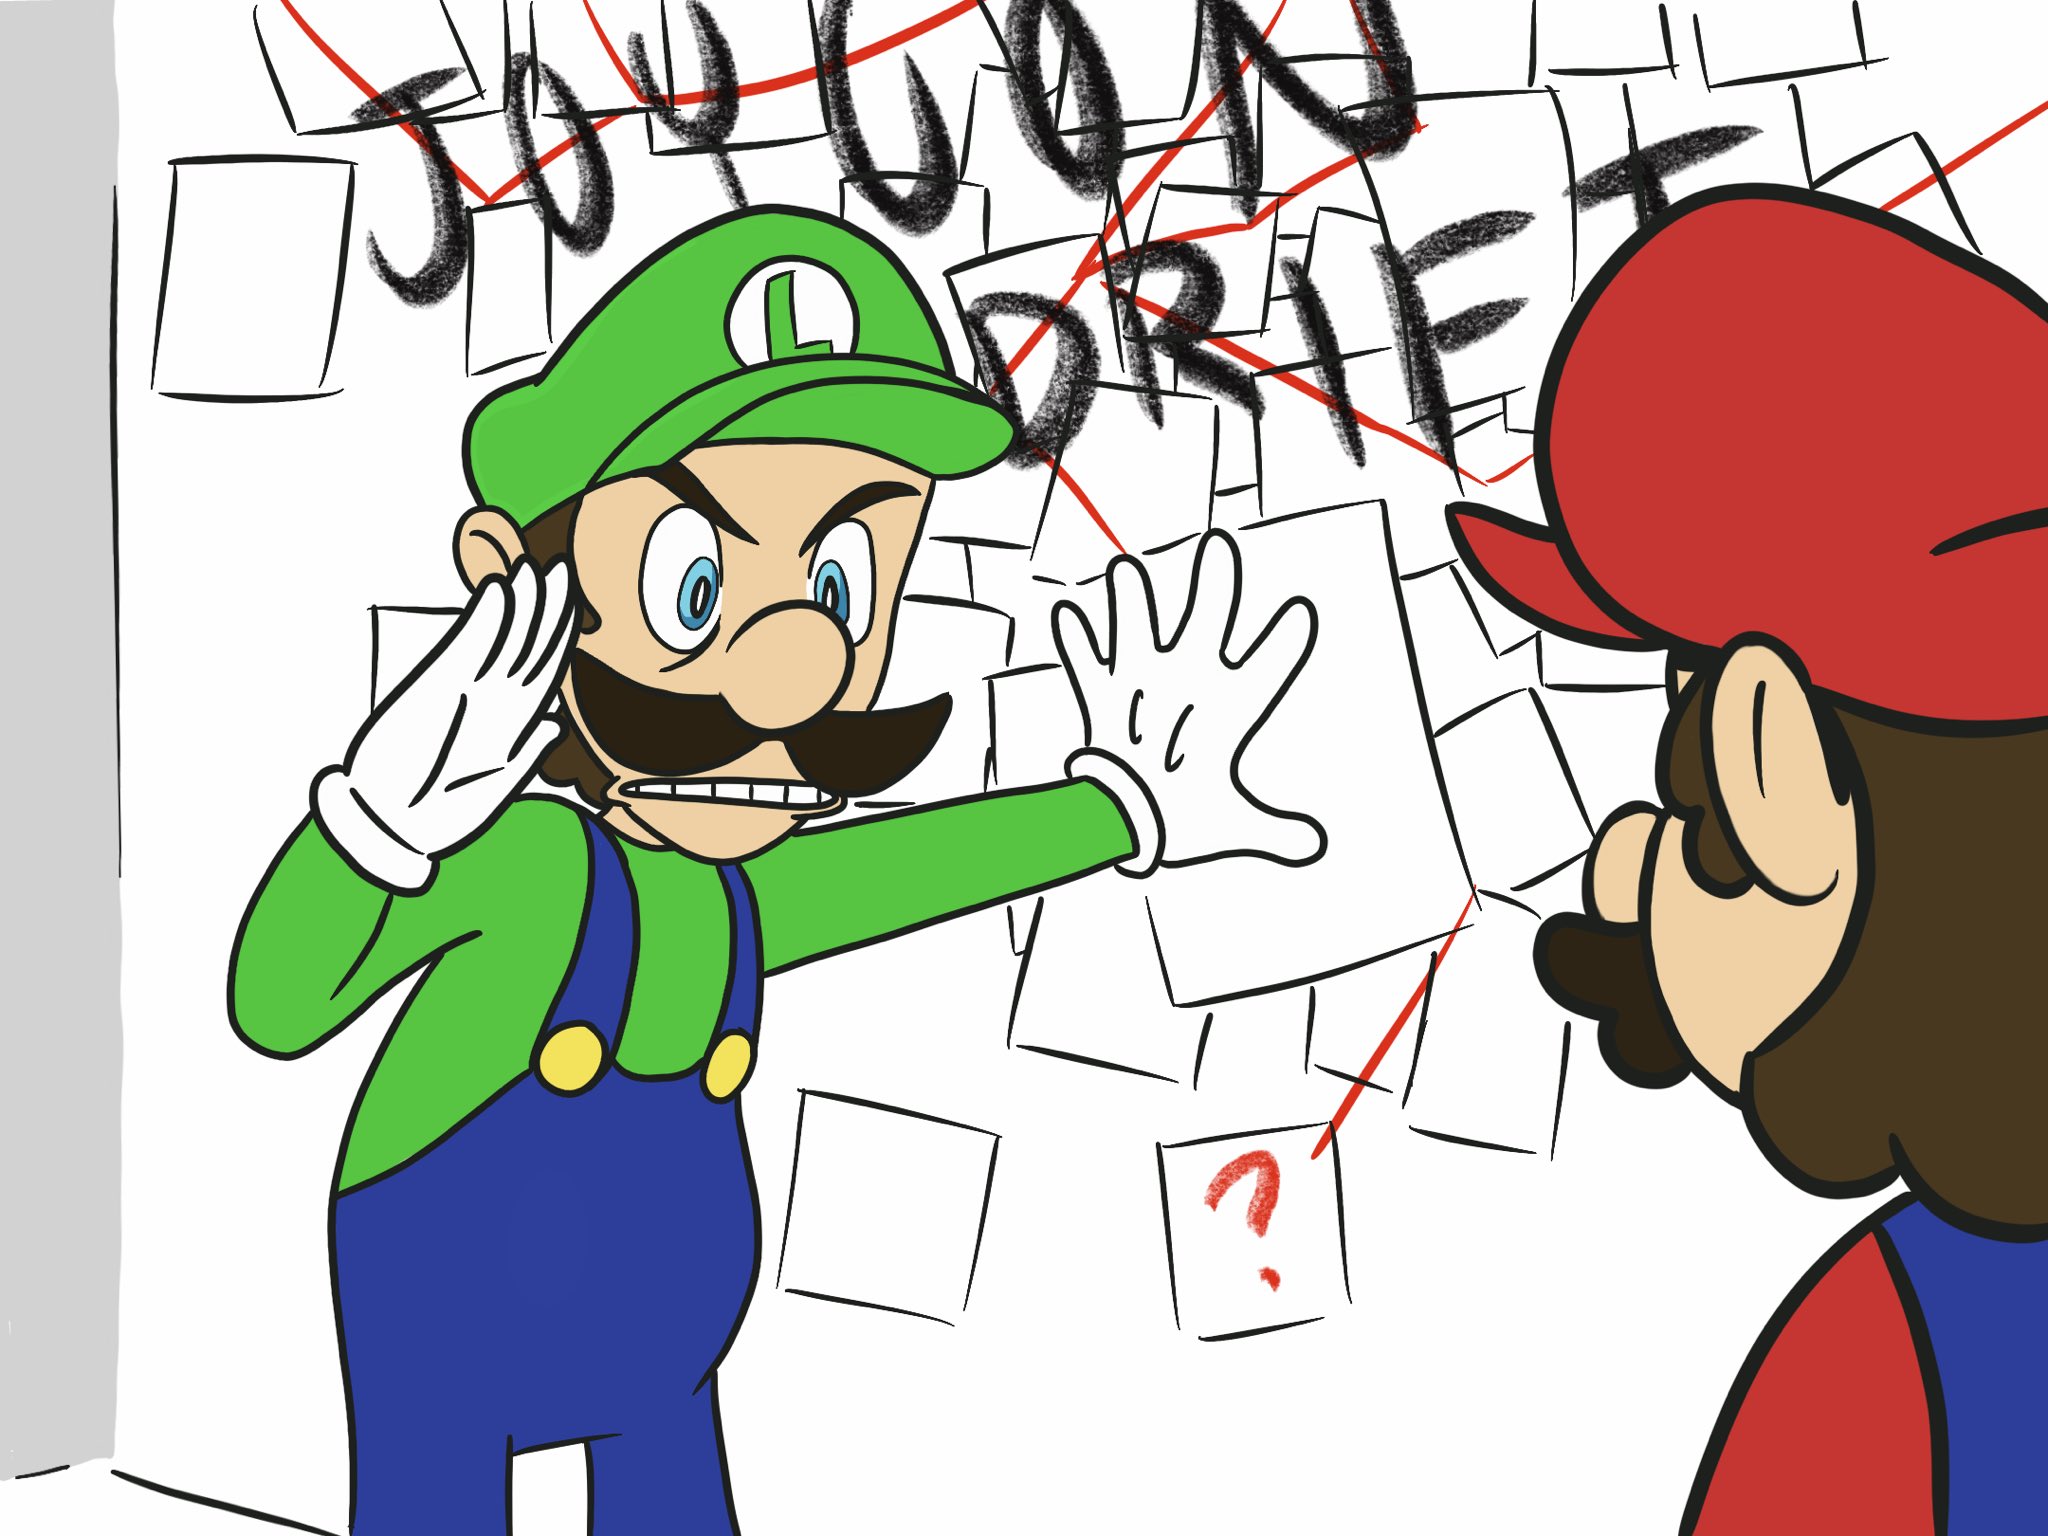 Charlie Day Conspiracy Meme Recreated With Luigi Is Perfect